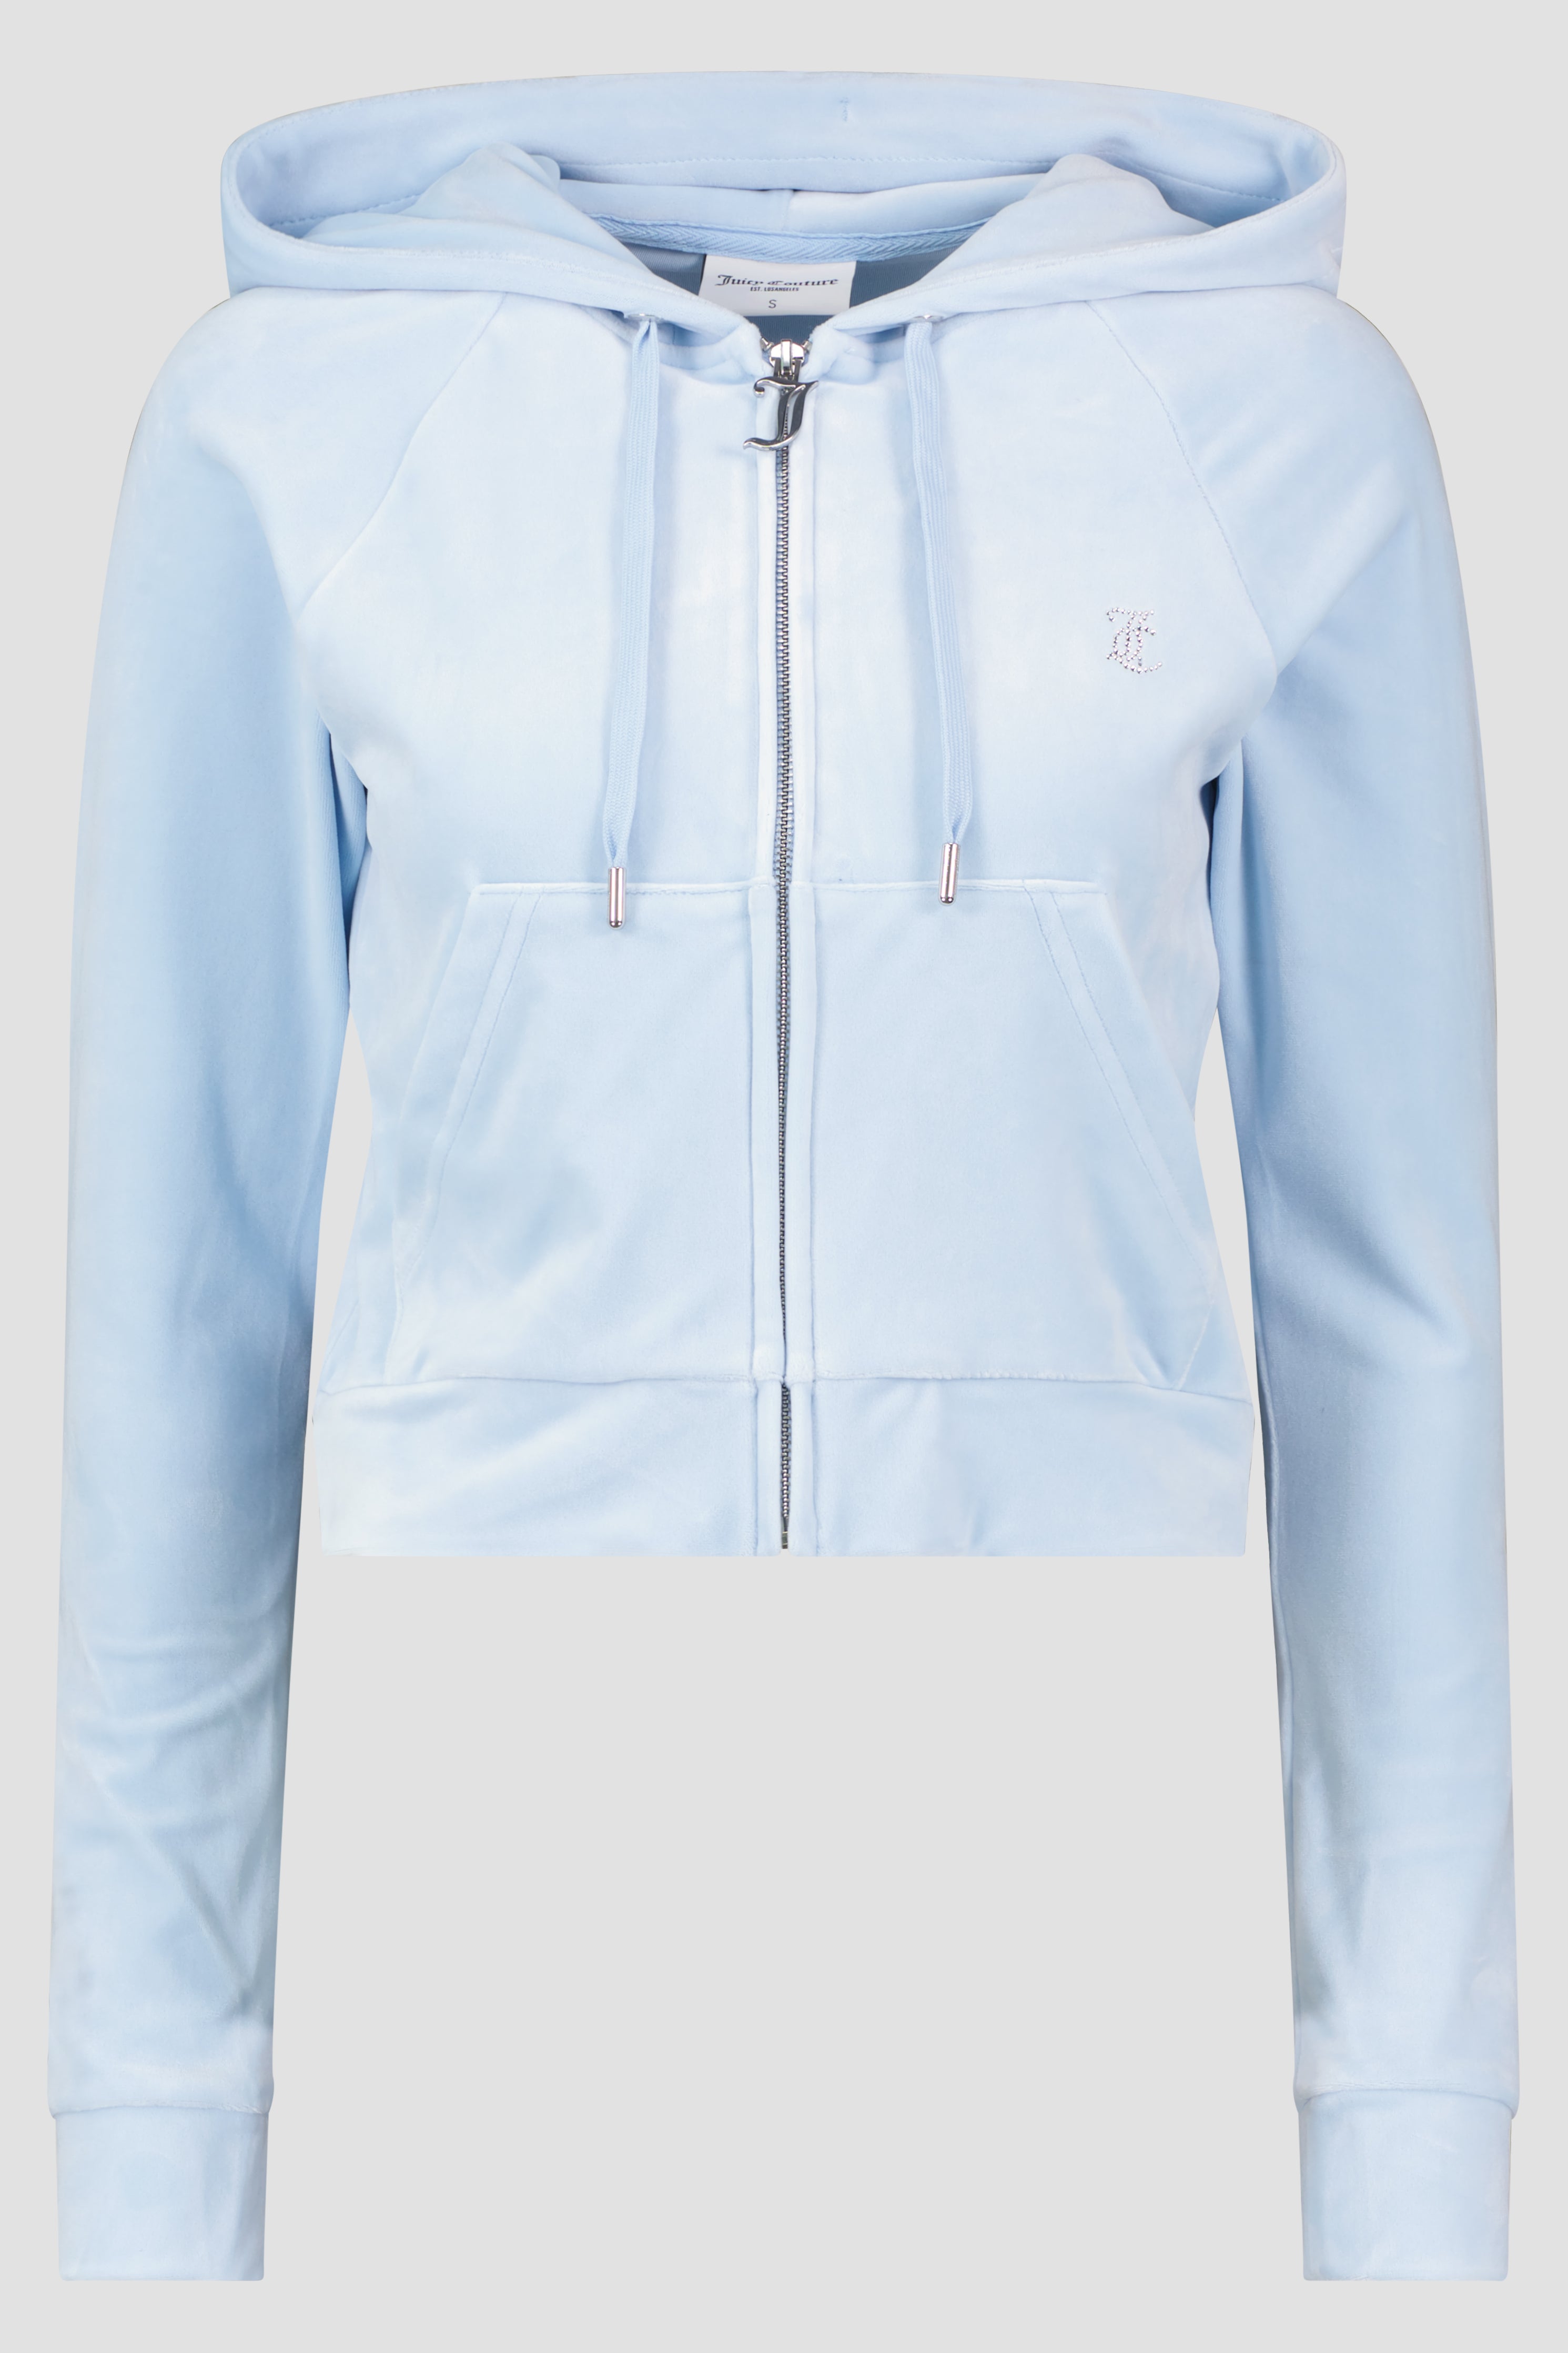 Women's Juicy Couture Powder Blue Madison Hoodie